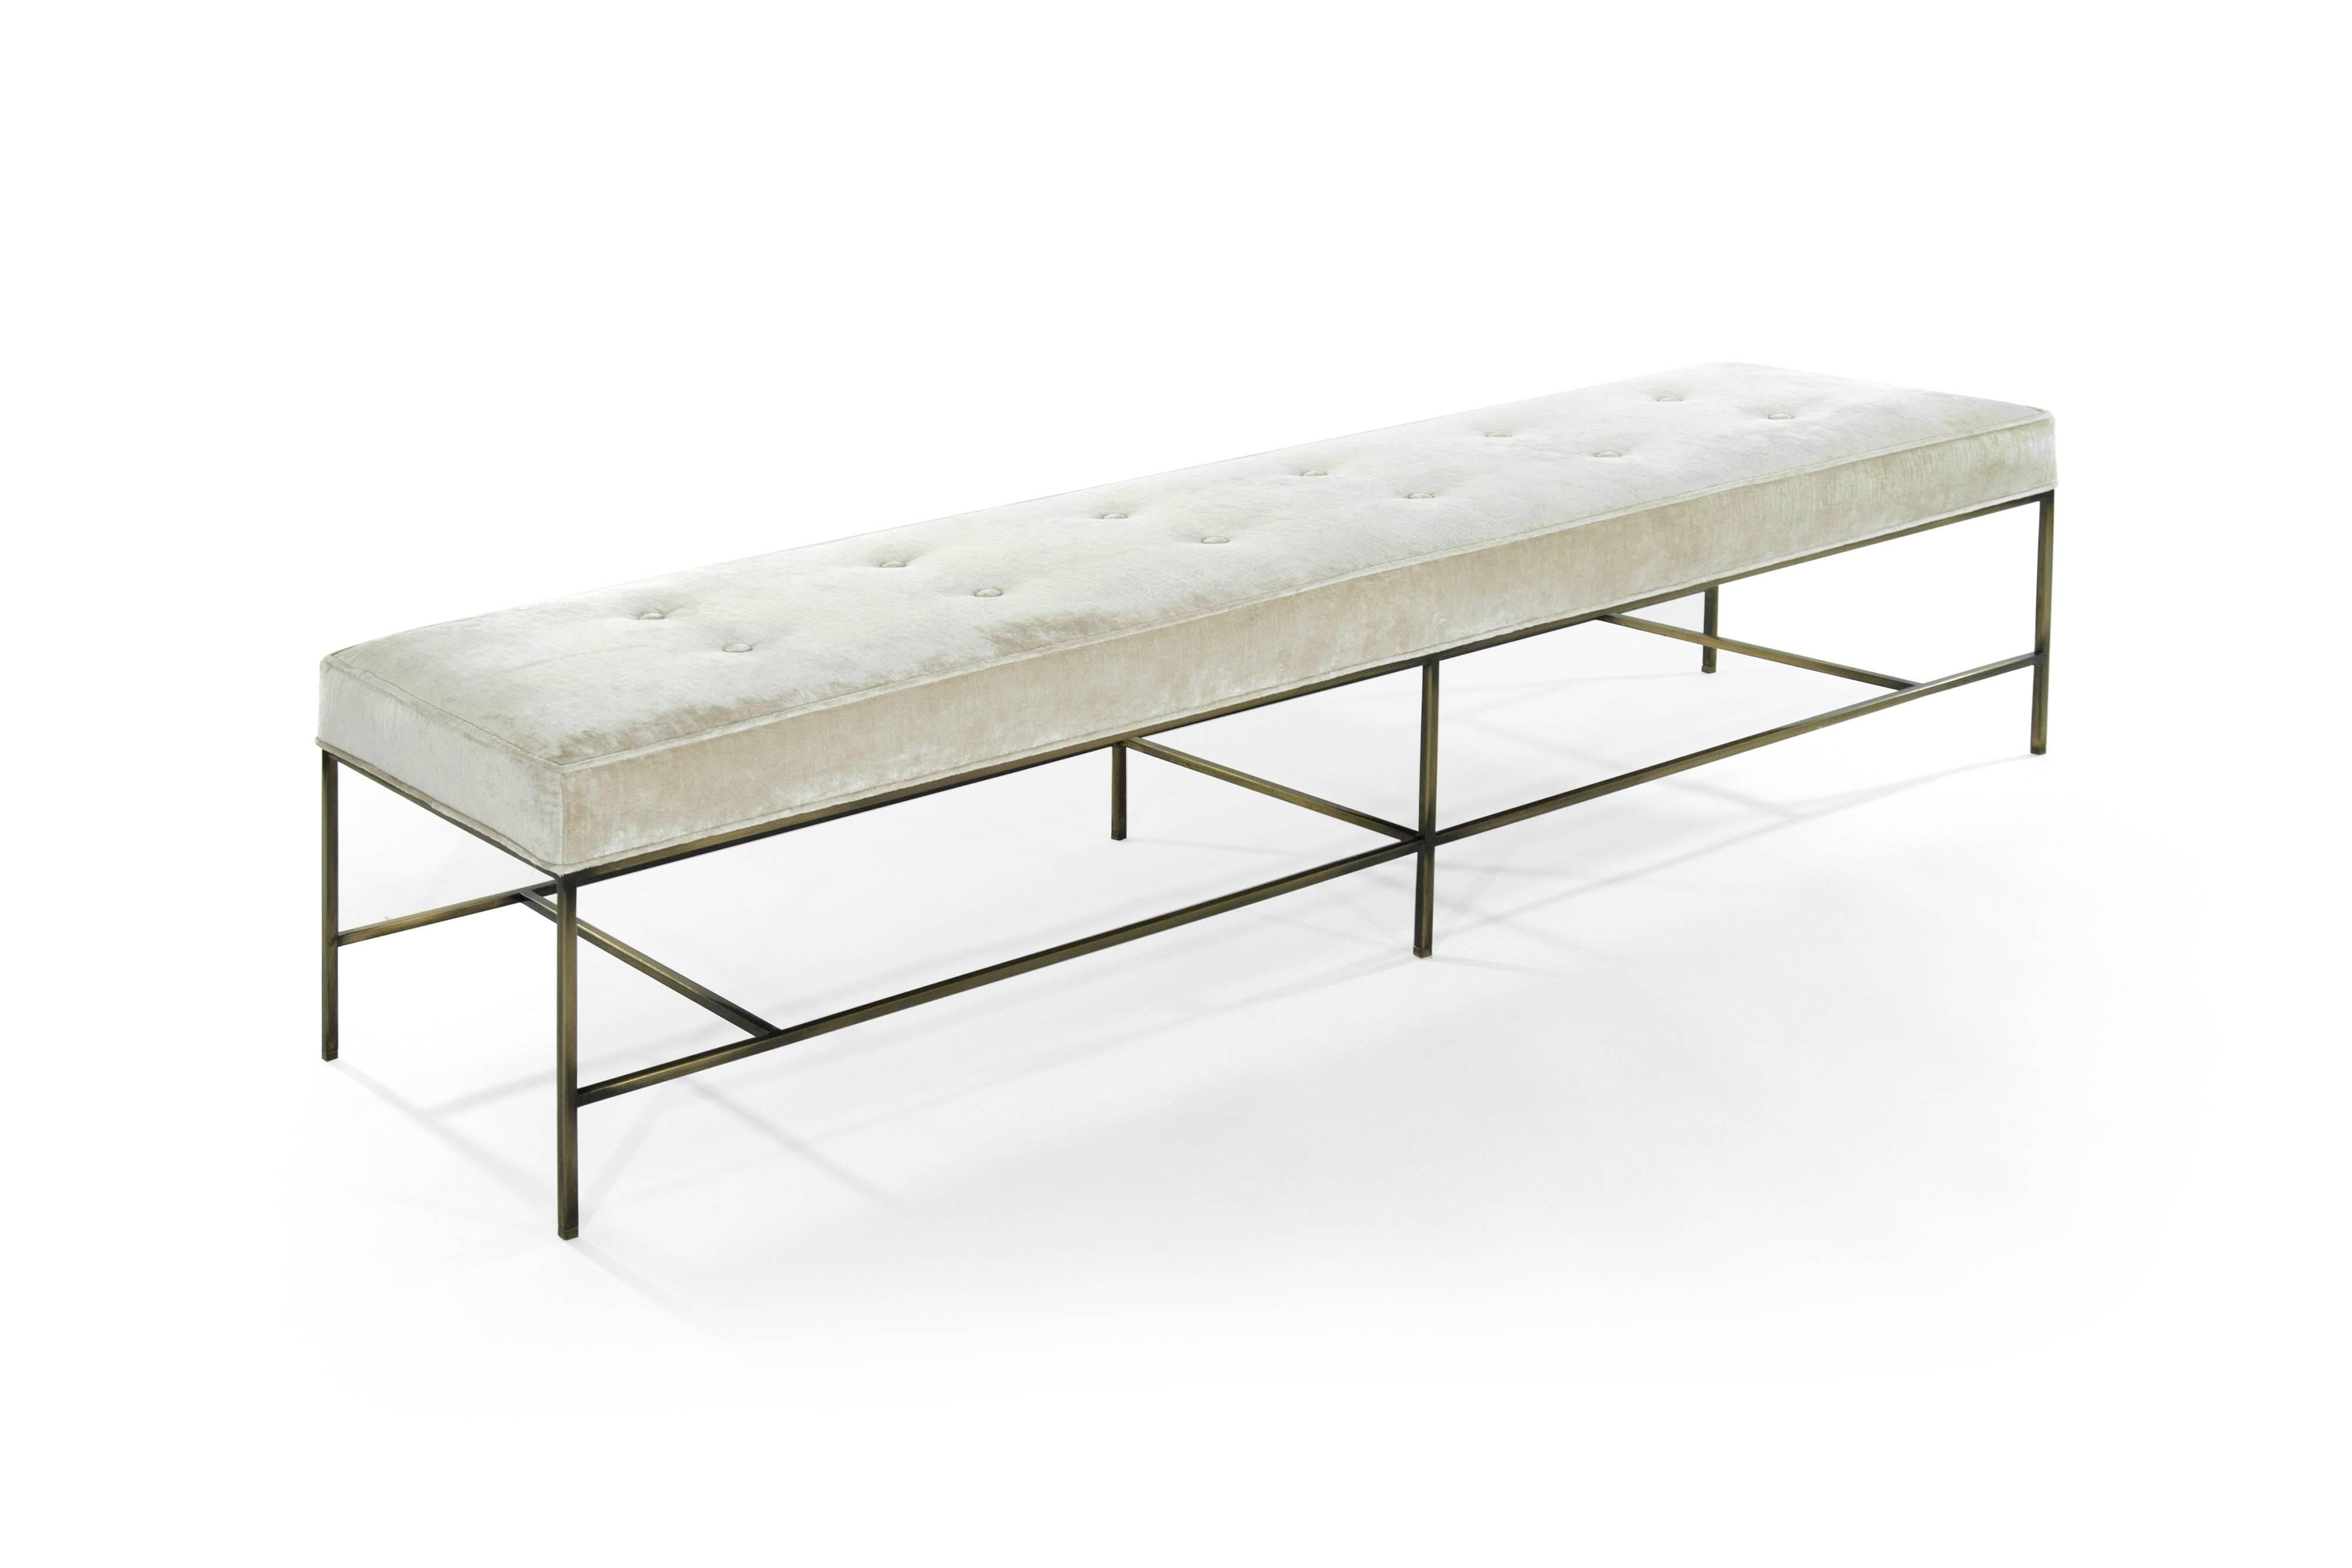 Introducing The Architectural Bench by Carlos Solano for Stamford Modern—a sleek and sophisticated addition to any contemporary space. Meticulously crafted with an all-metal construction, this bench epitomizes the essence of minimalistic design.